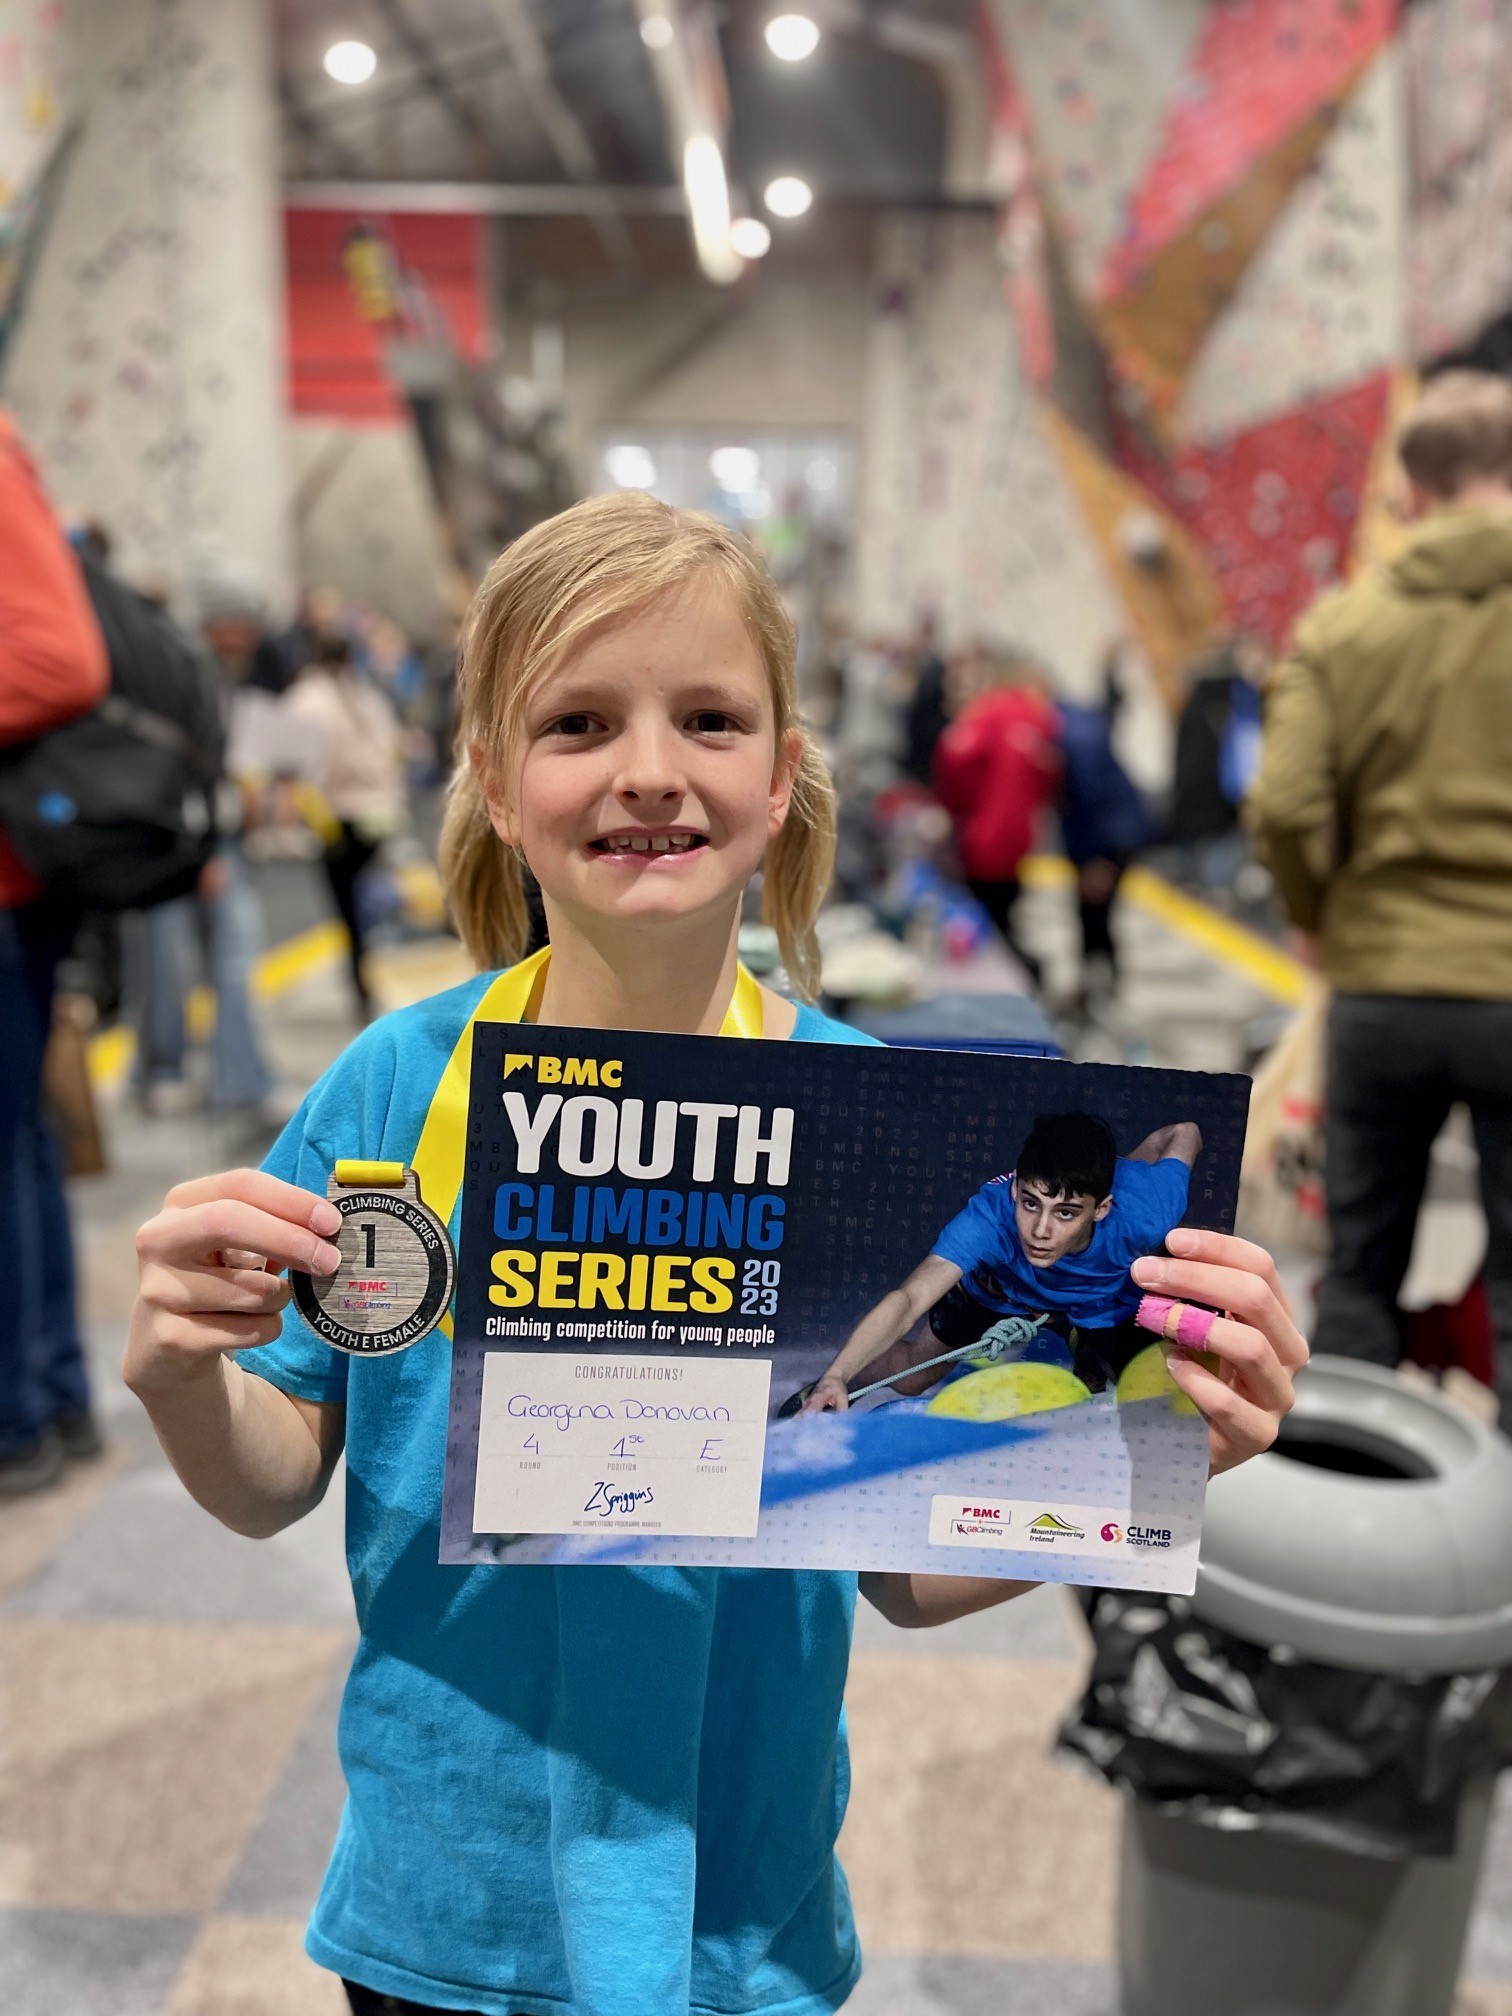 Nine-year-old Georgina Donovan is a champion climber, having won the Midlands Youth Climbing Series in her age category.